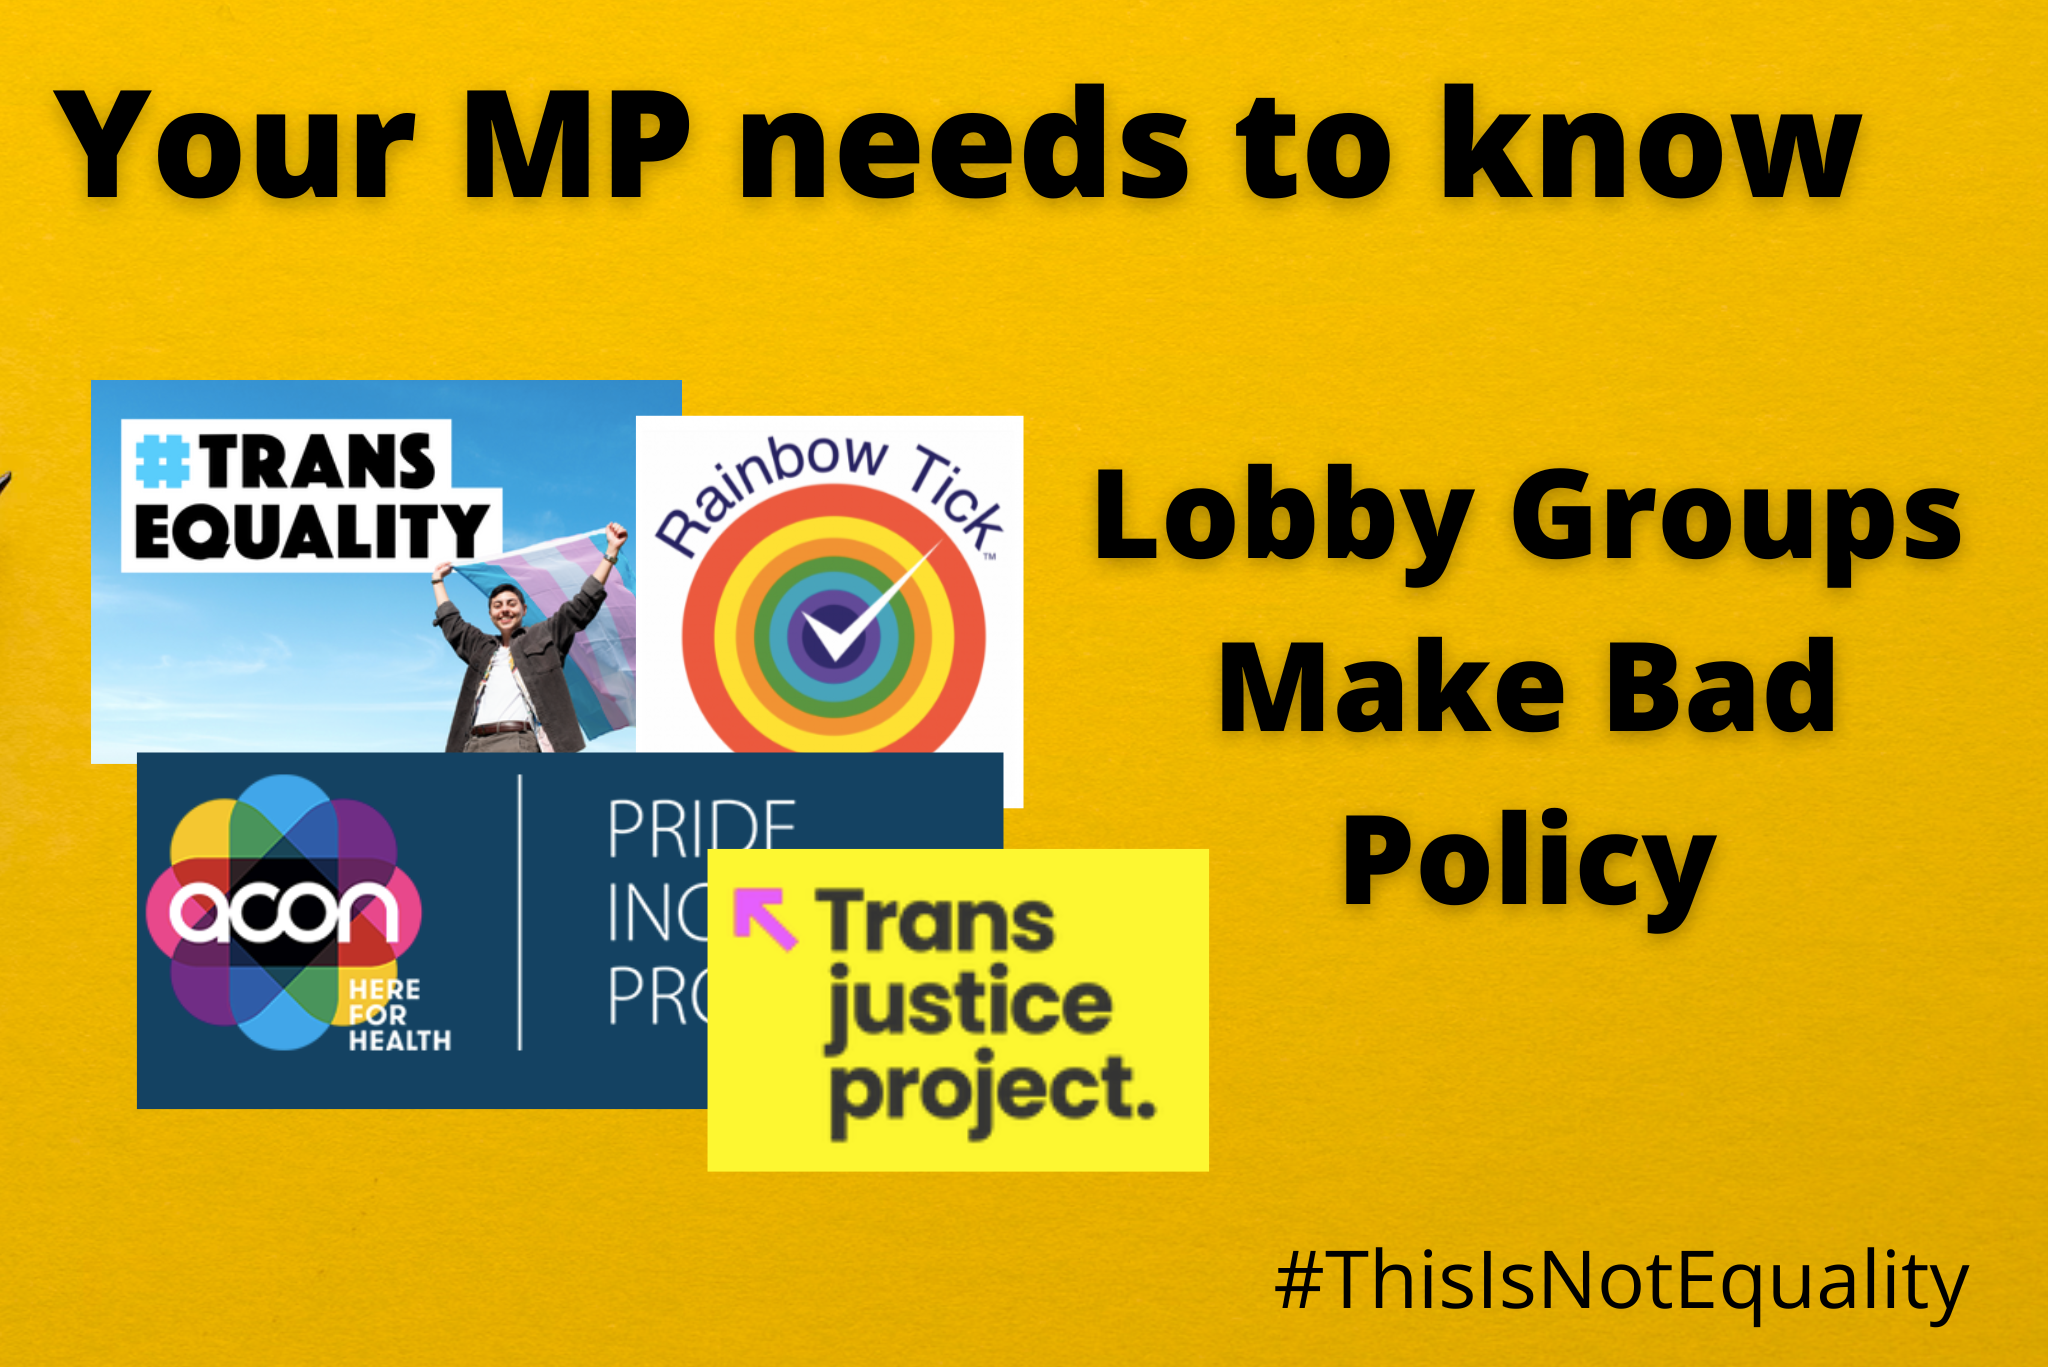 Tell your MP: Lobby Groups Make Bad Policy